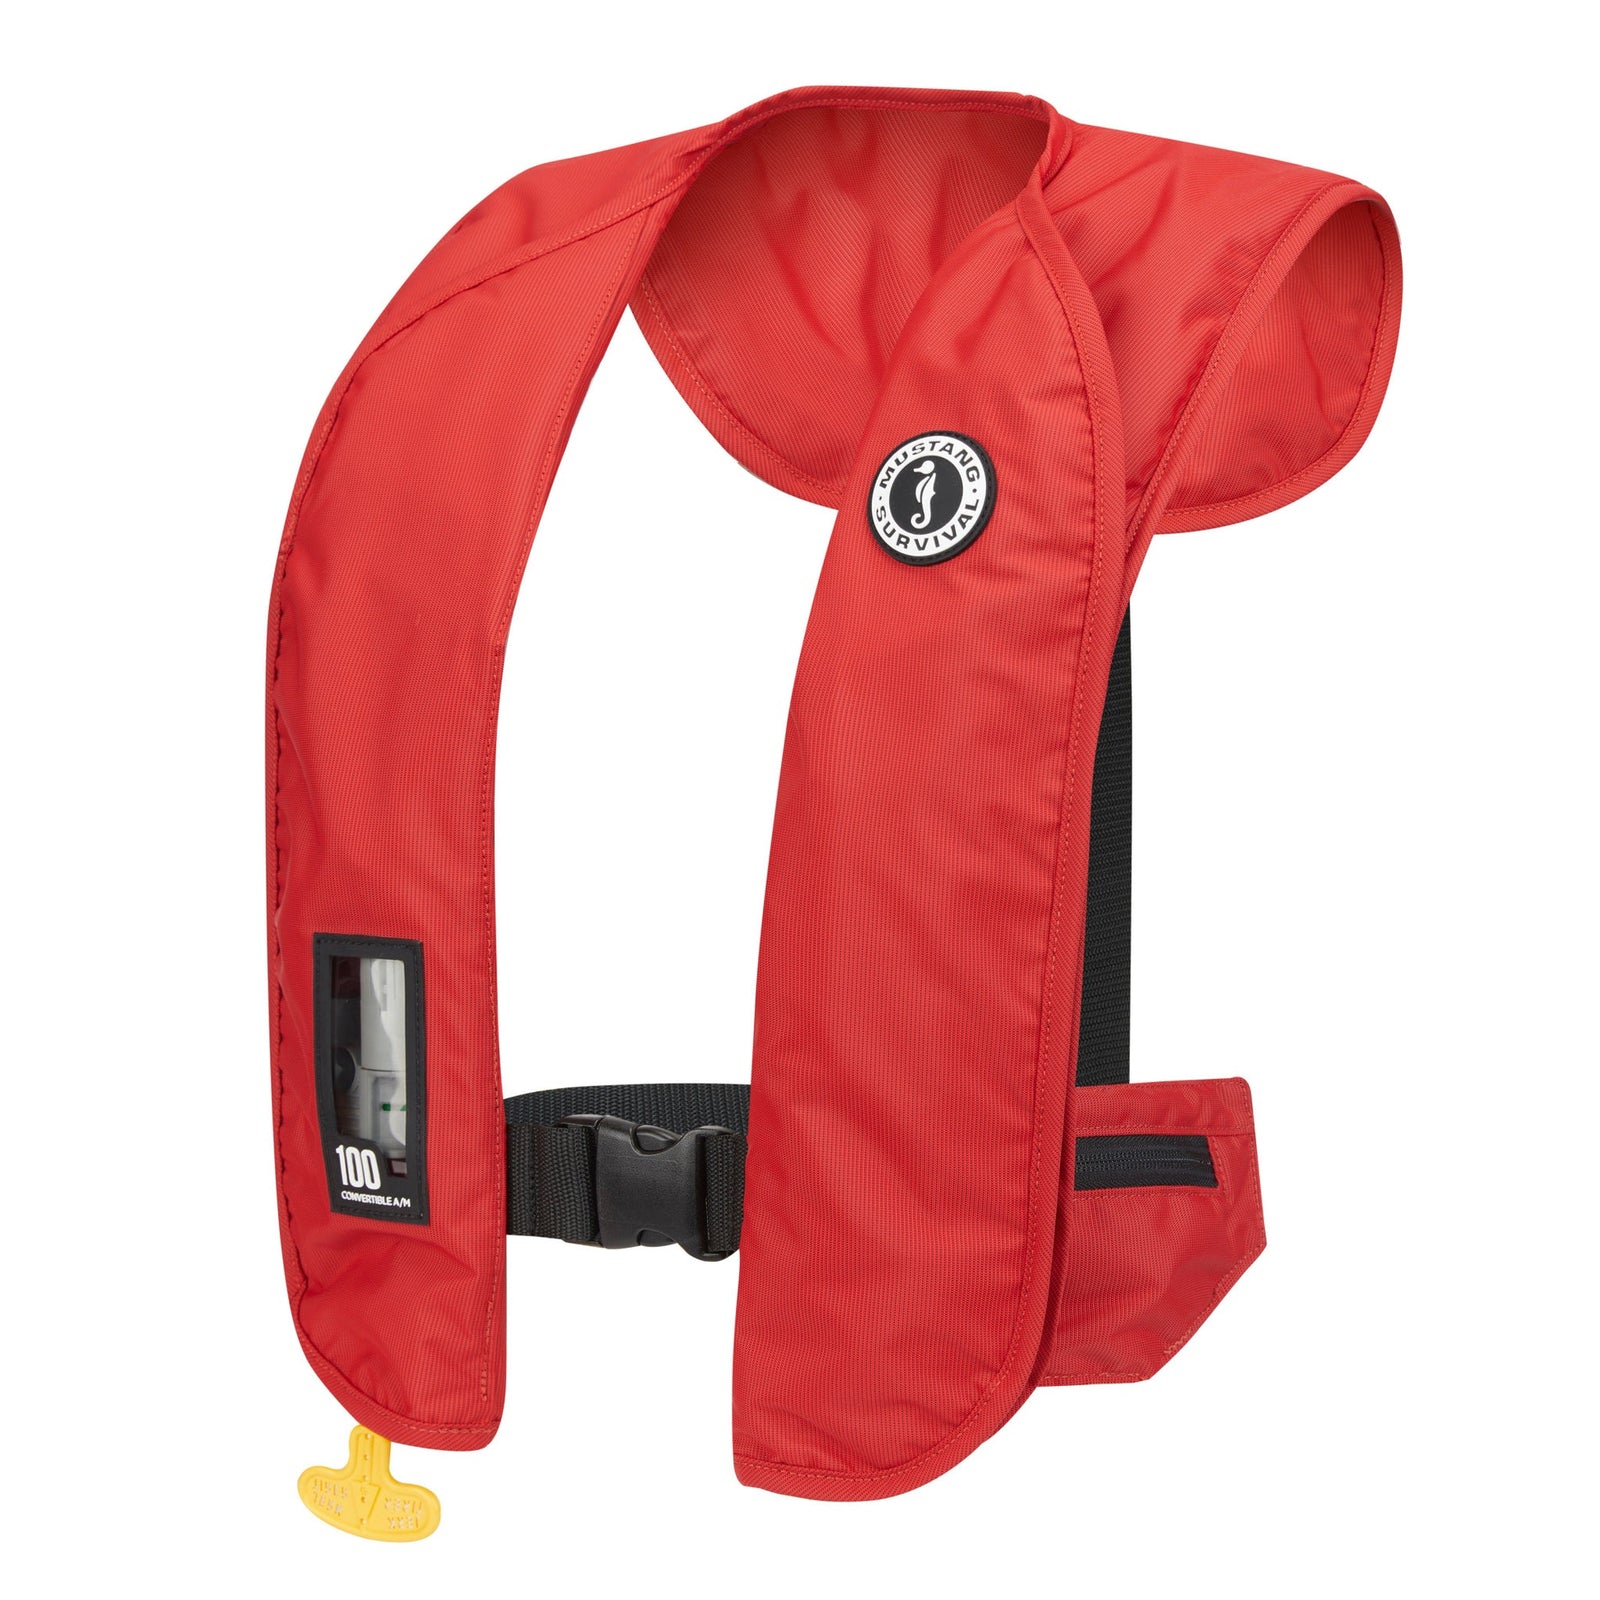 Newest Products Tagged Life Jacket - LOTWSHQ